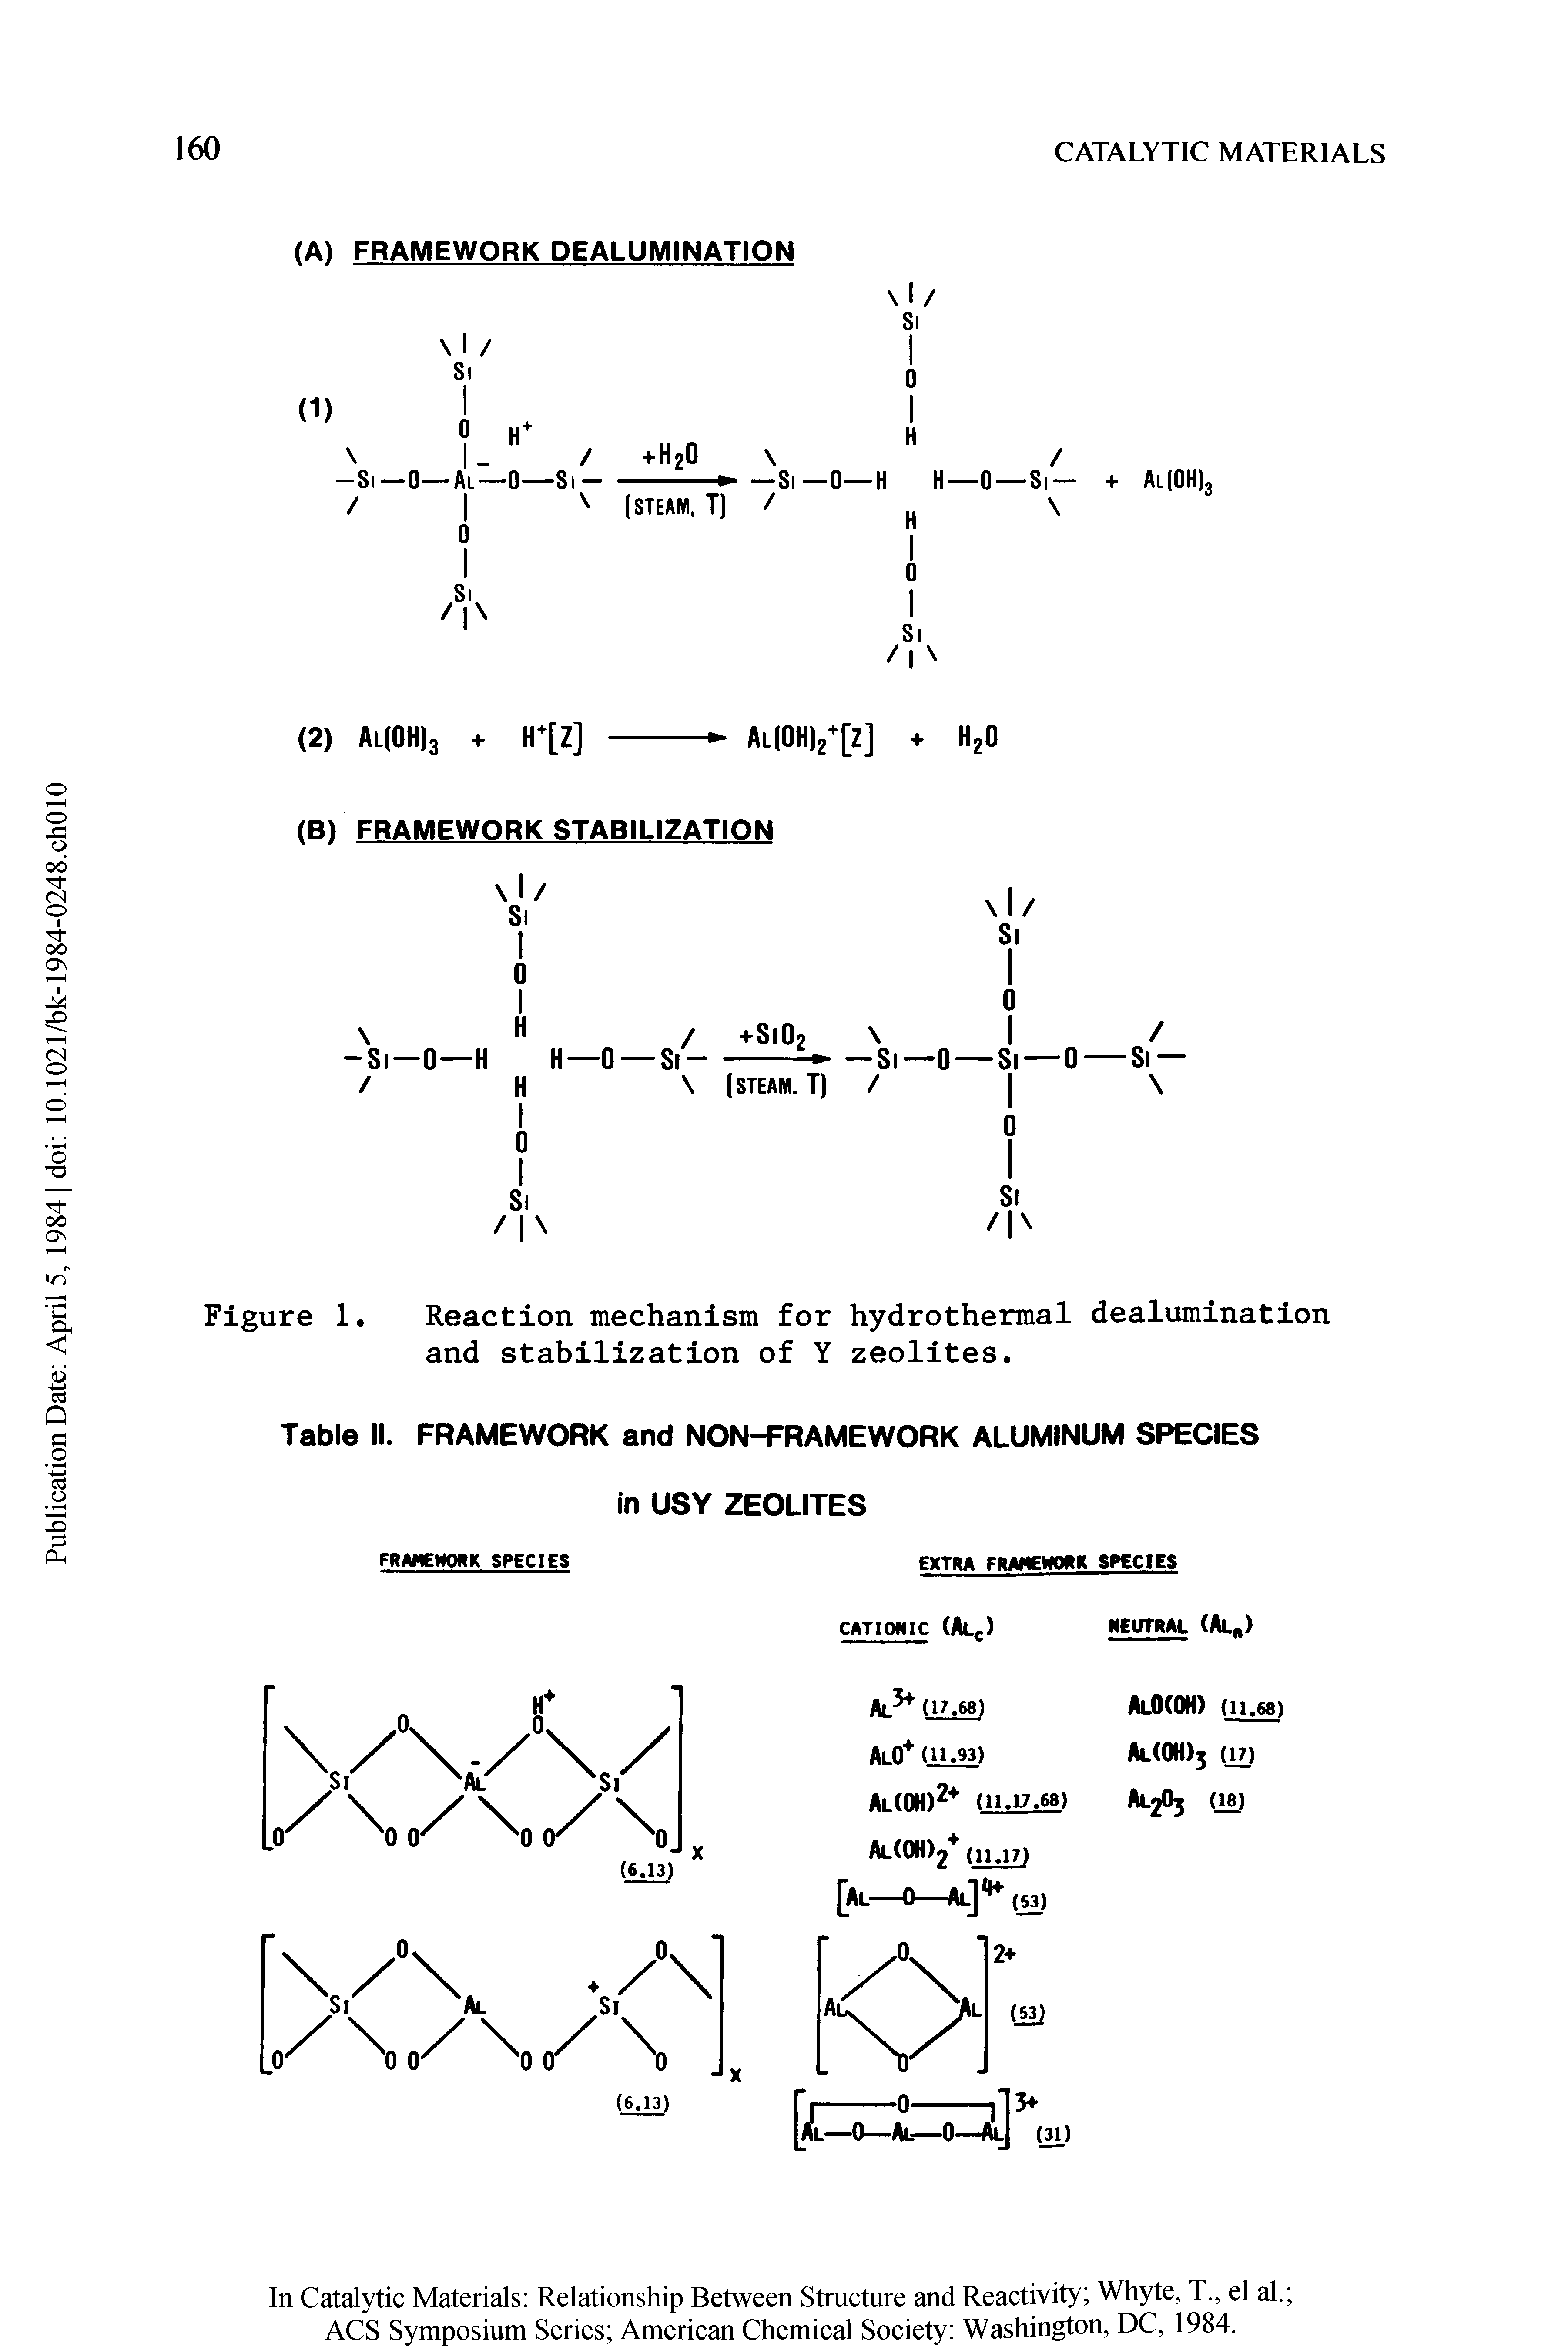 Figure 1. Reaction mechanism for hydrothermal dealumination and stabilization of Y zeolites.